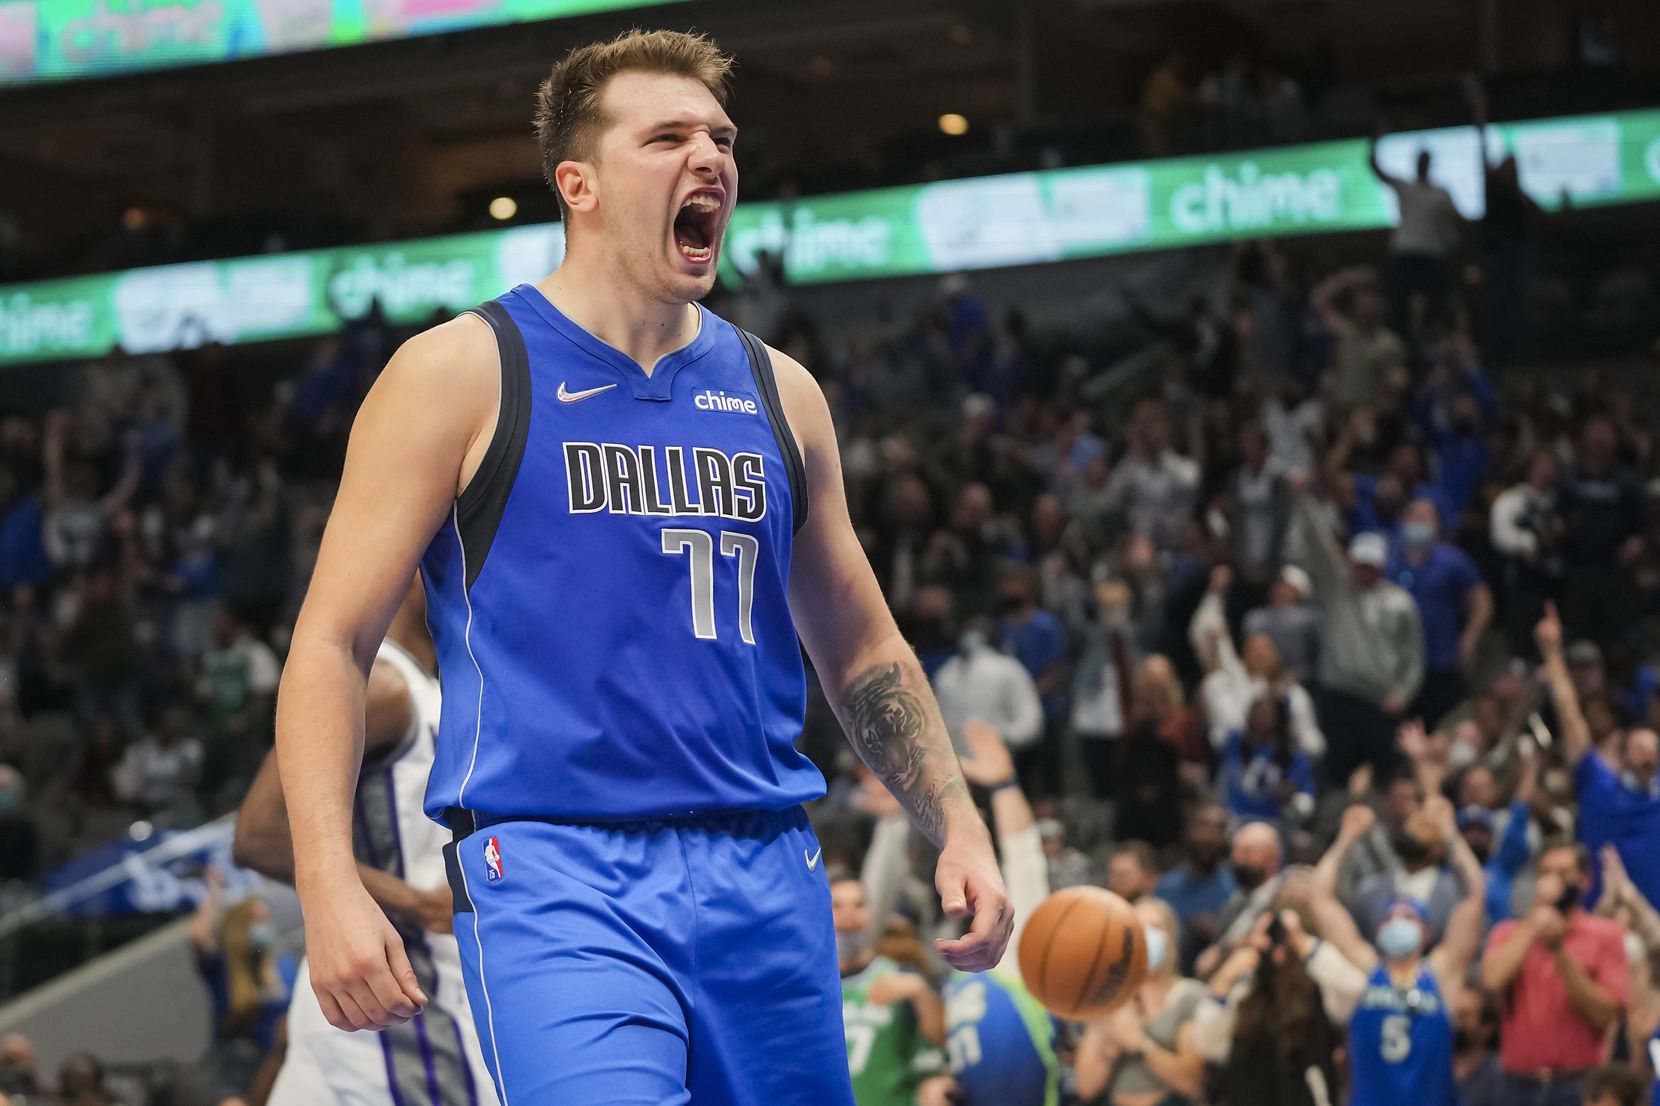 Dallas Mavericks guard Luka Doncic celebrates after feeding forward Dorian Finney-Smith for a breakaway dunk during the second half of a game against the Sacramento Kings at American Airlines Center on Oct. 31, 2021.